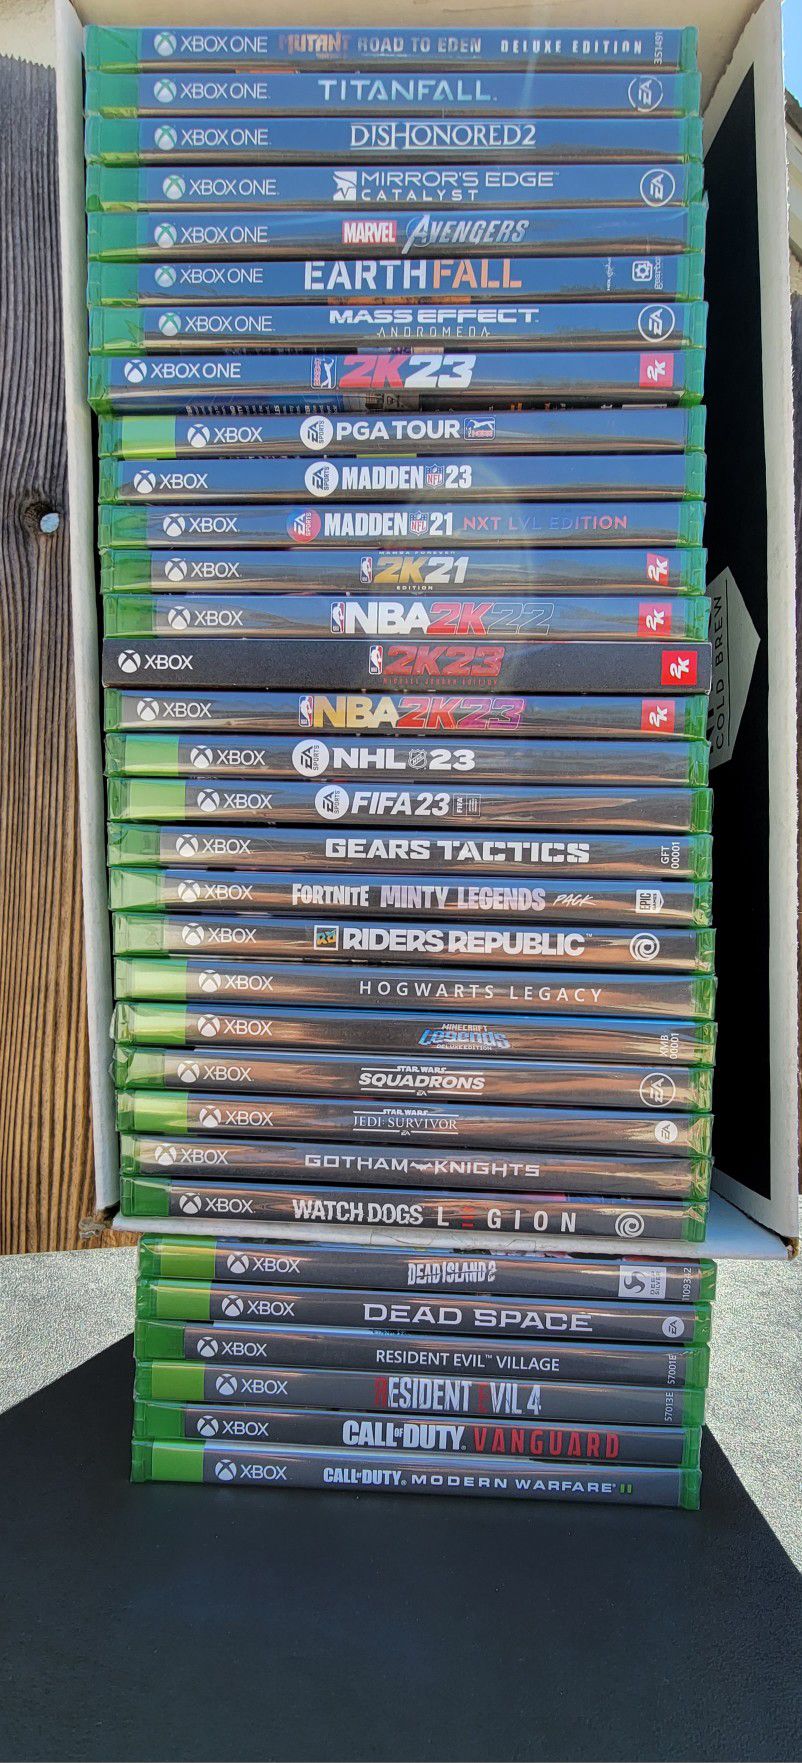 Madden 22 For Xbox Series X for Sale in Shafter, CA - OfferUp